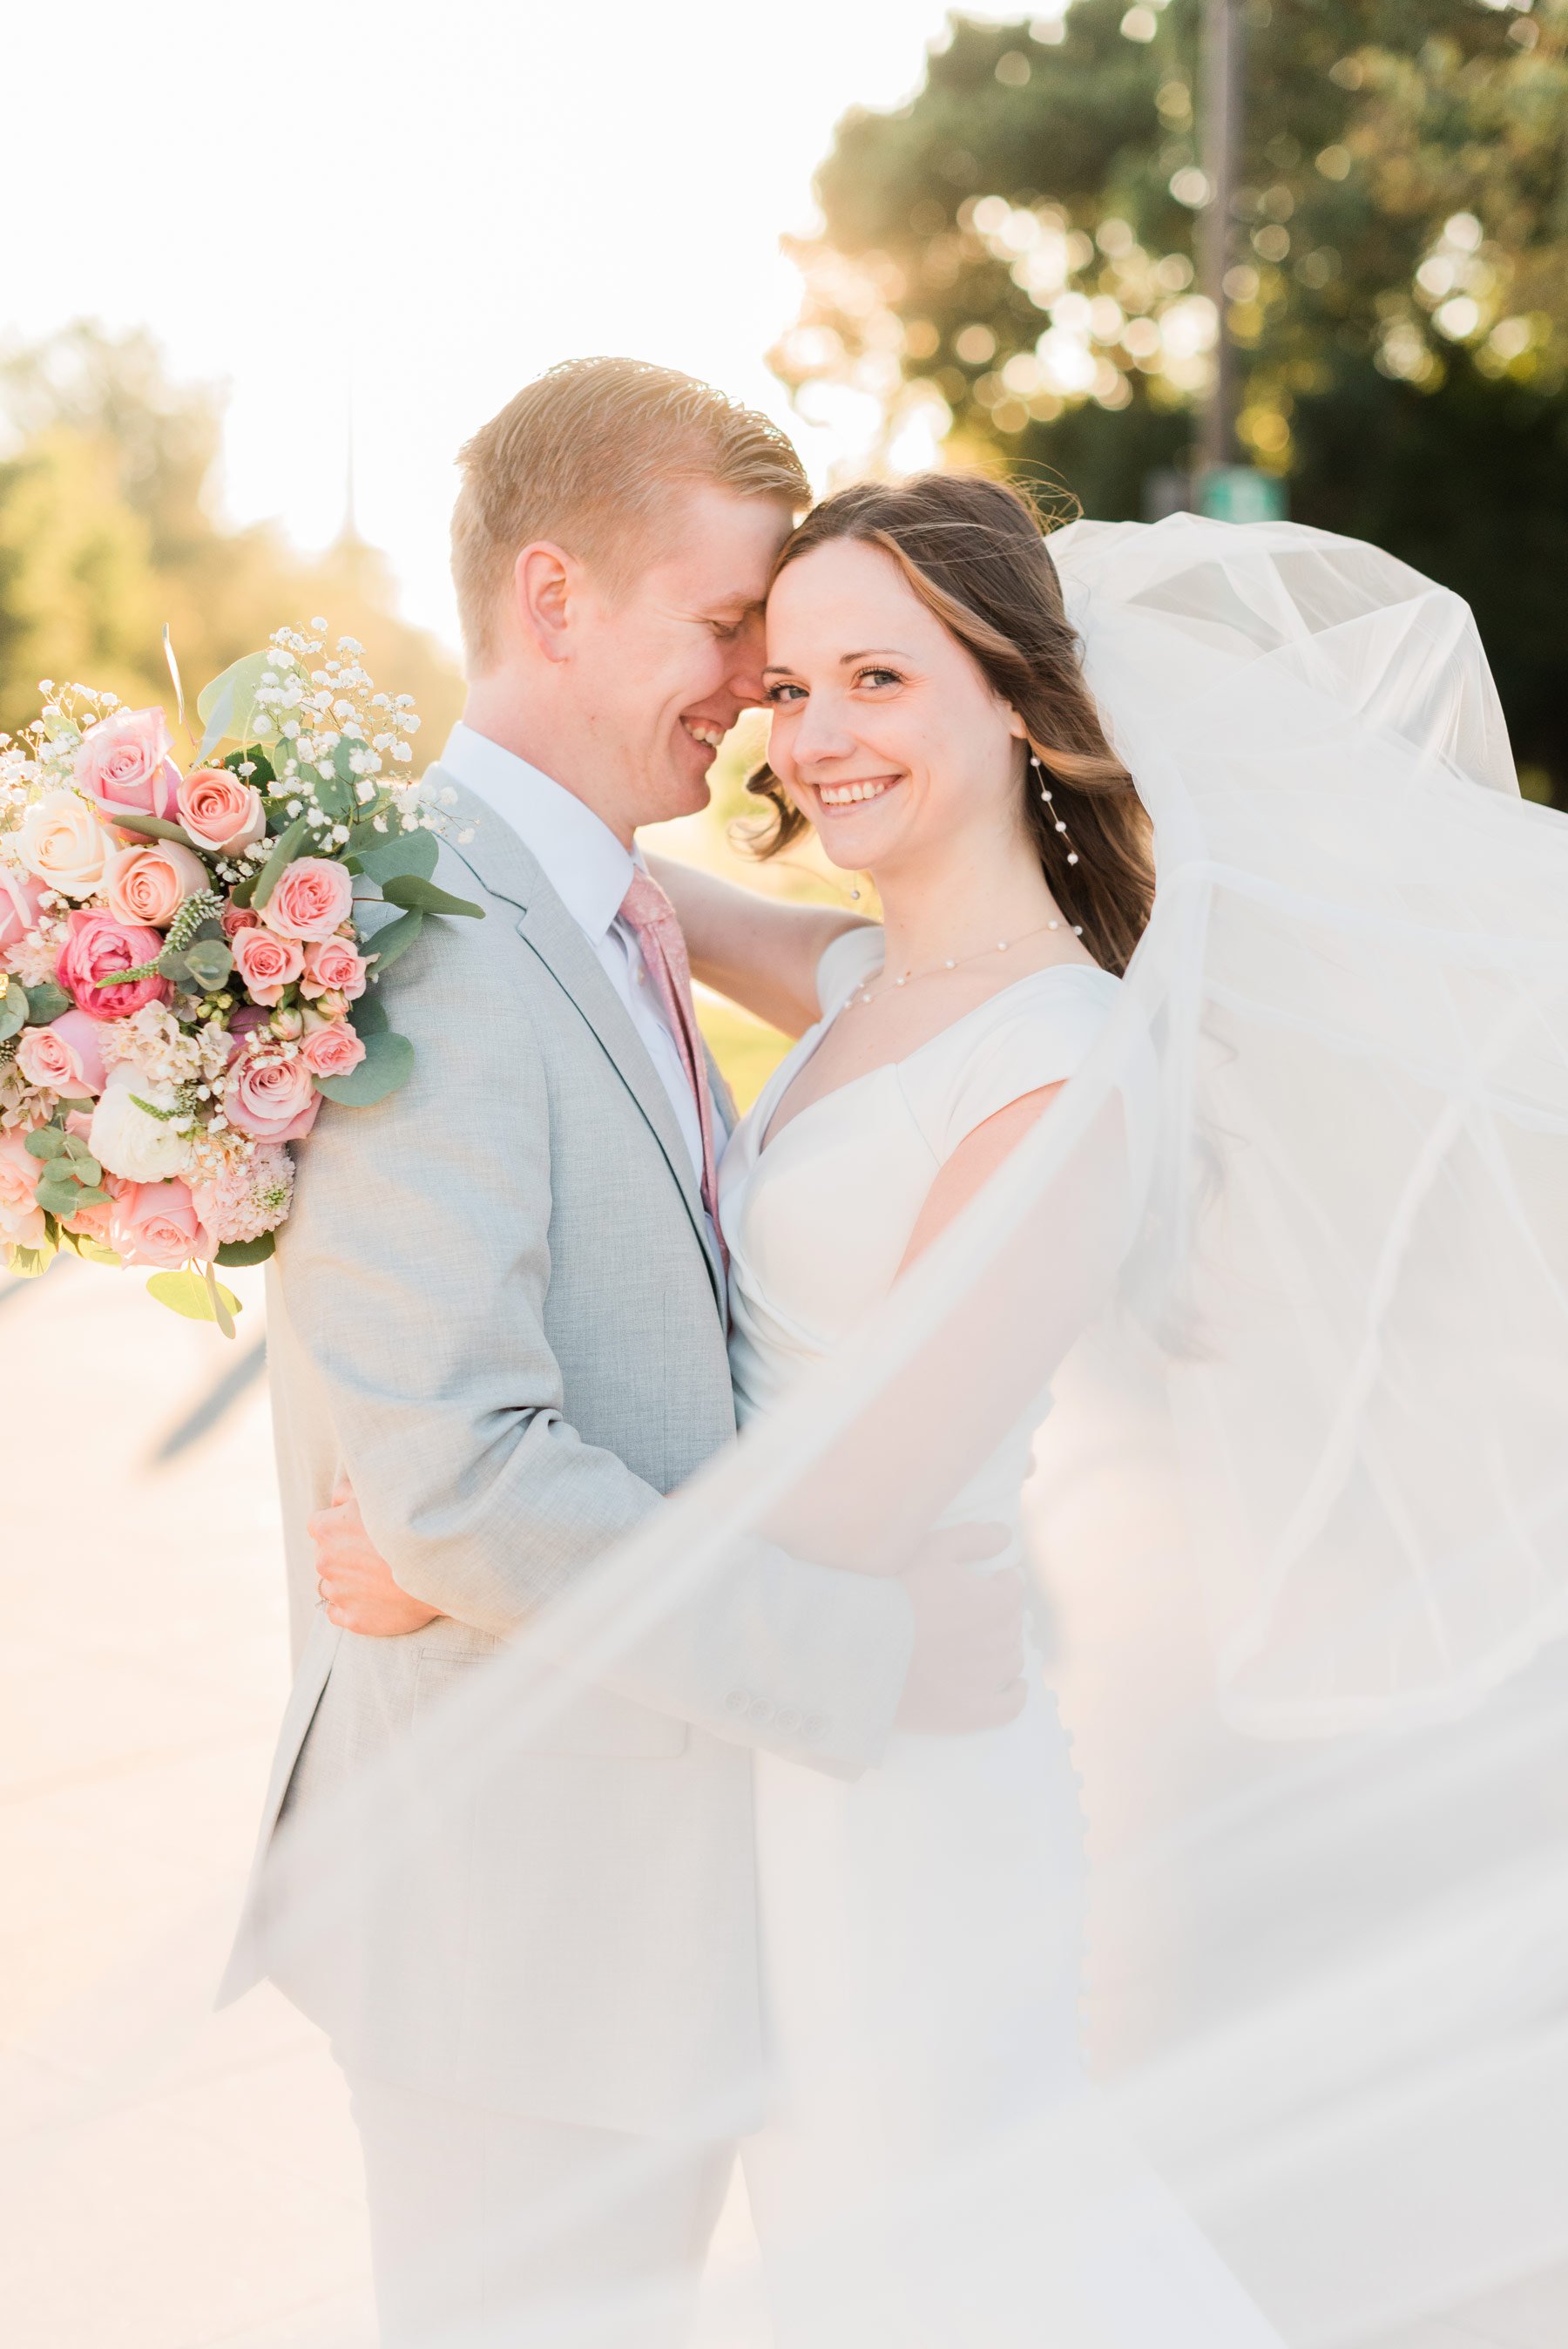  Jacquie Erickson photography captures a young couple during a bridal photo session. Bride looks happily at the camera while leaning her forehead on her groom. #bridalphotosession #portraitphotography #atlantaphotographer #jacquieerickson #fayettevil